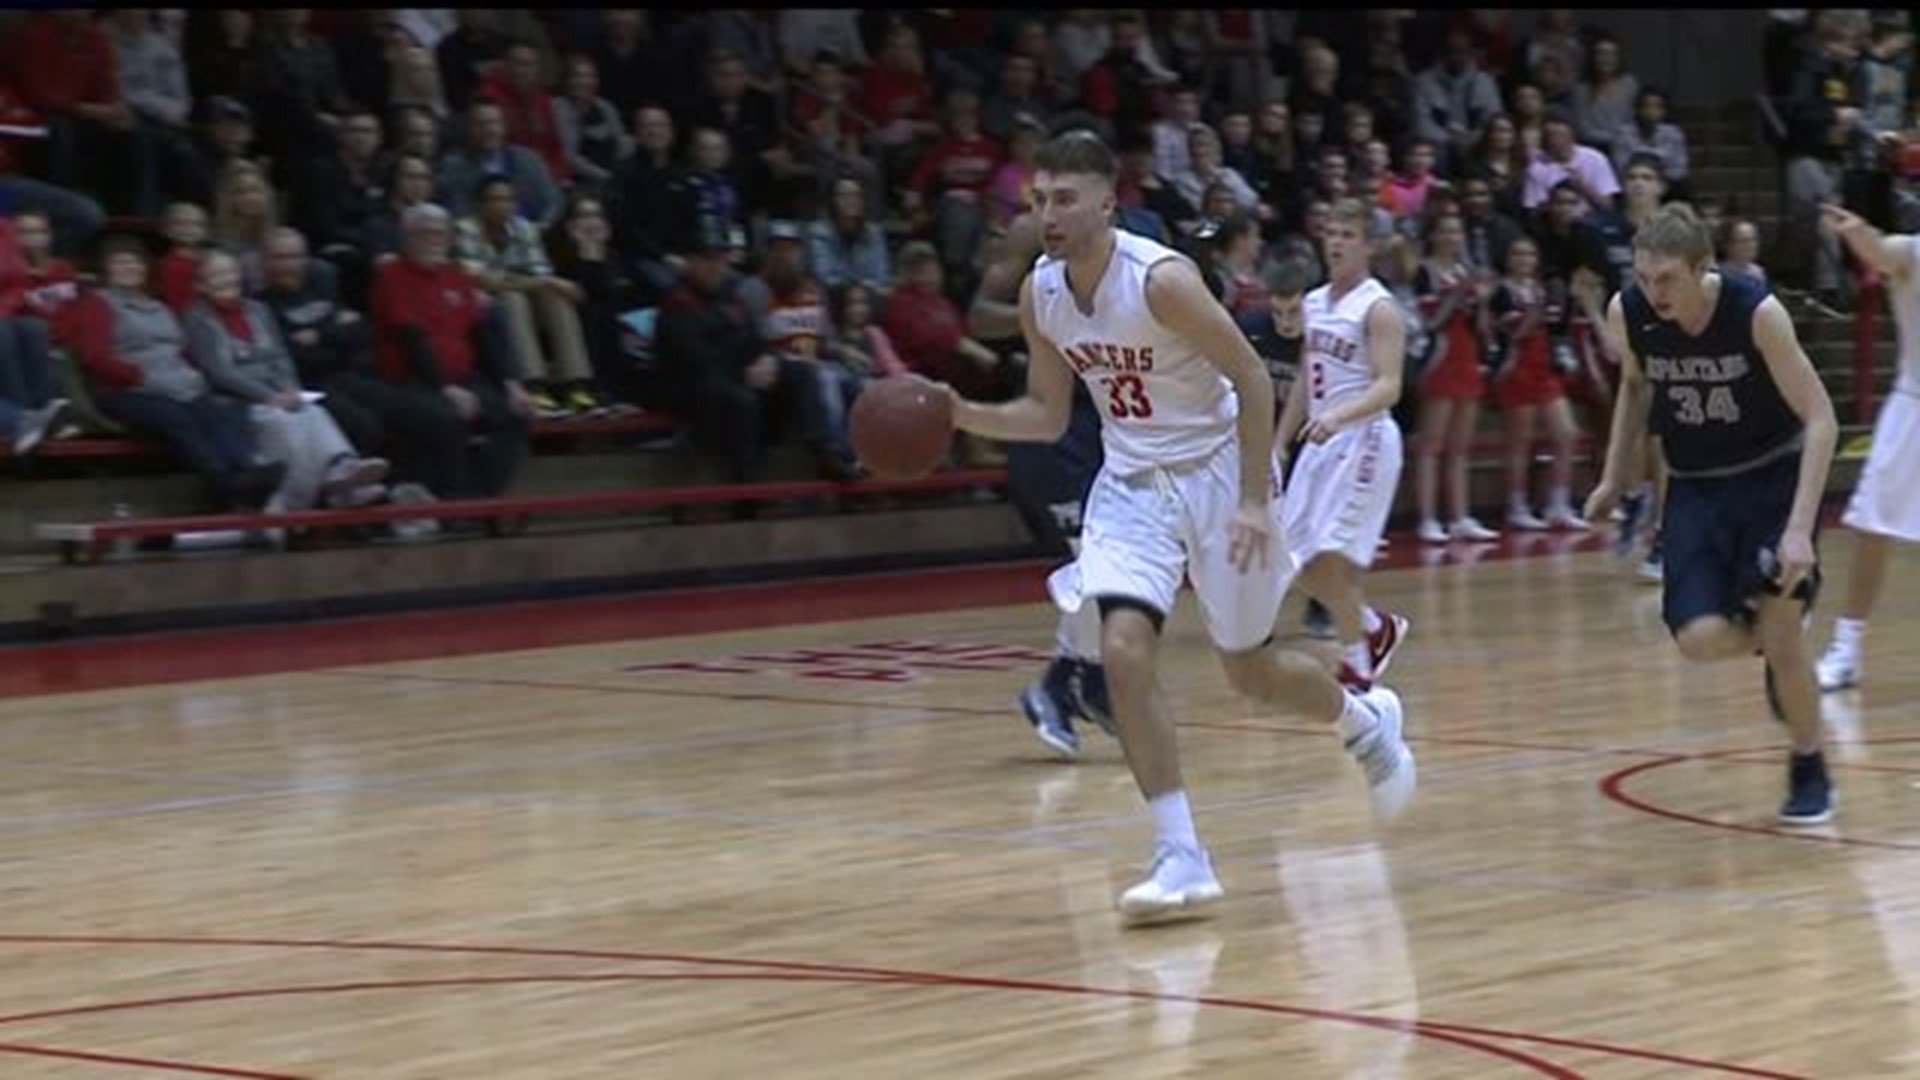 North Scott tops PV at The Pit